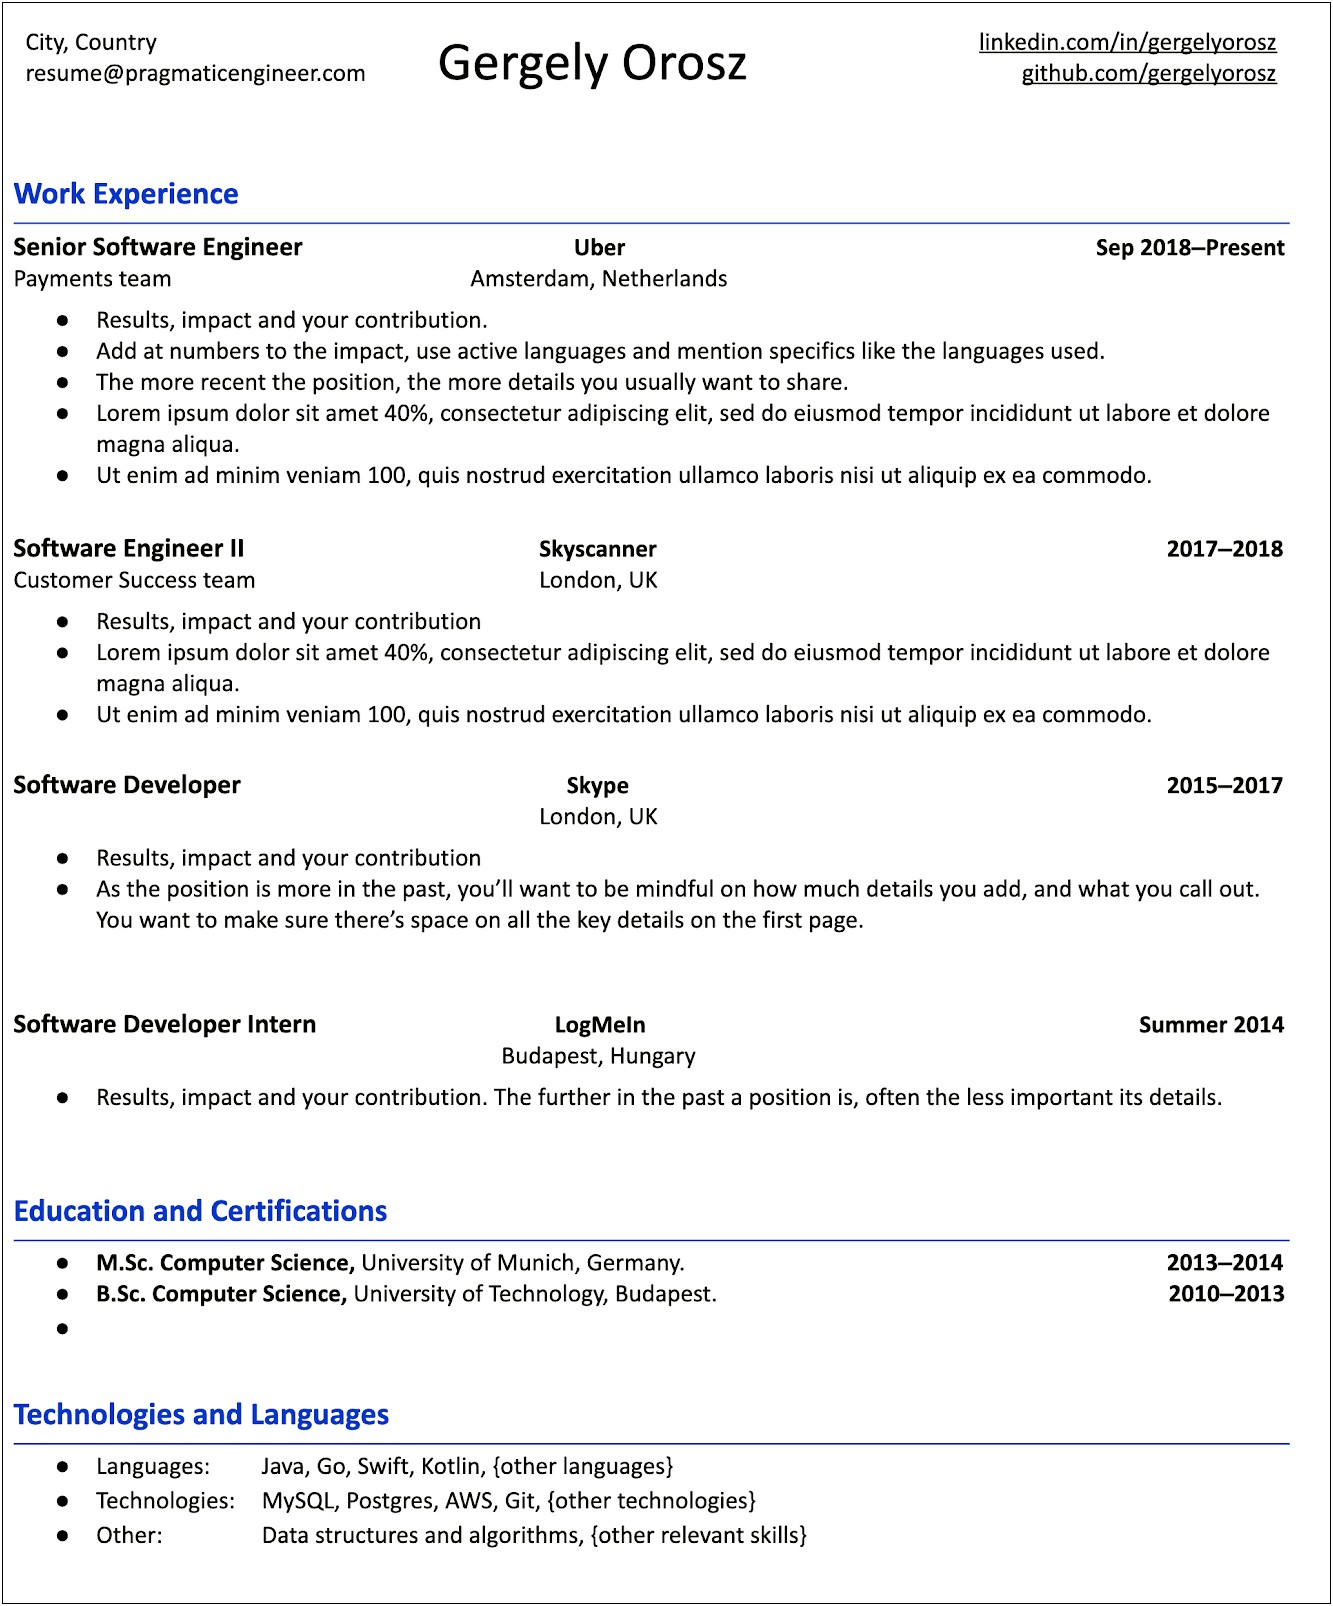 Education Section Of Resume Ask A Manager